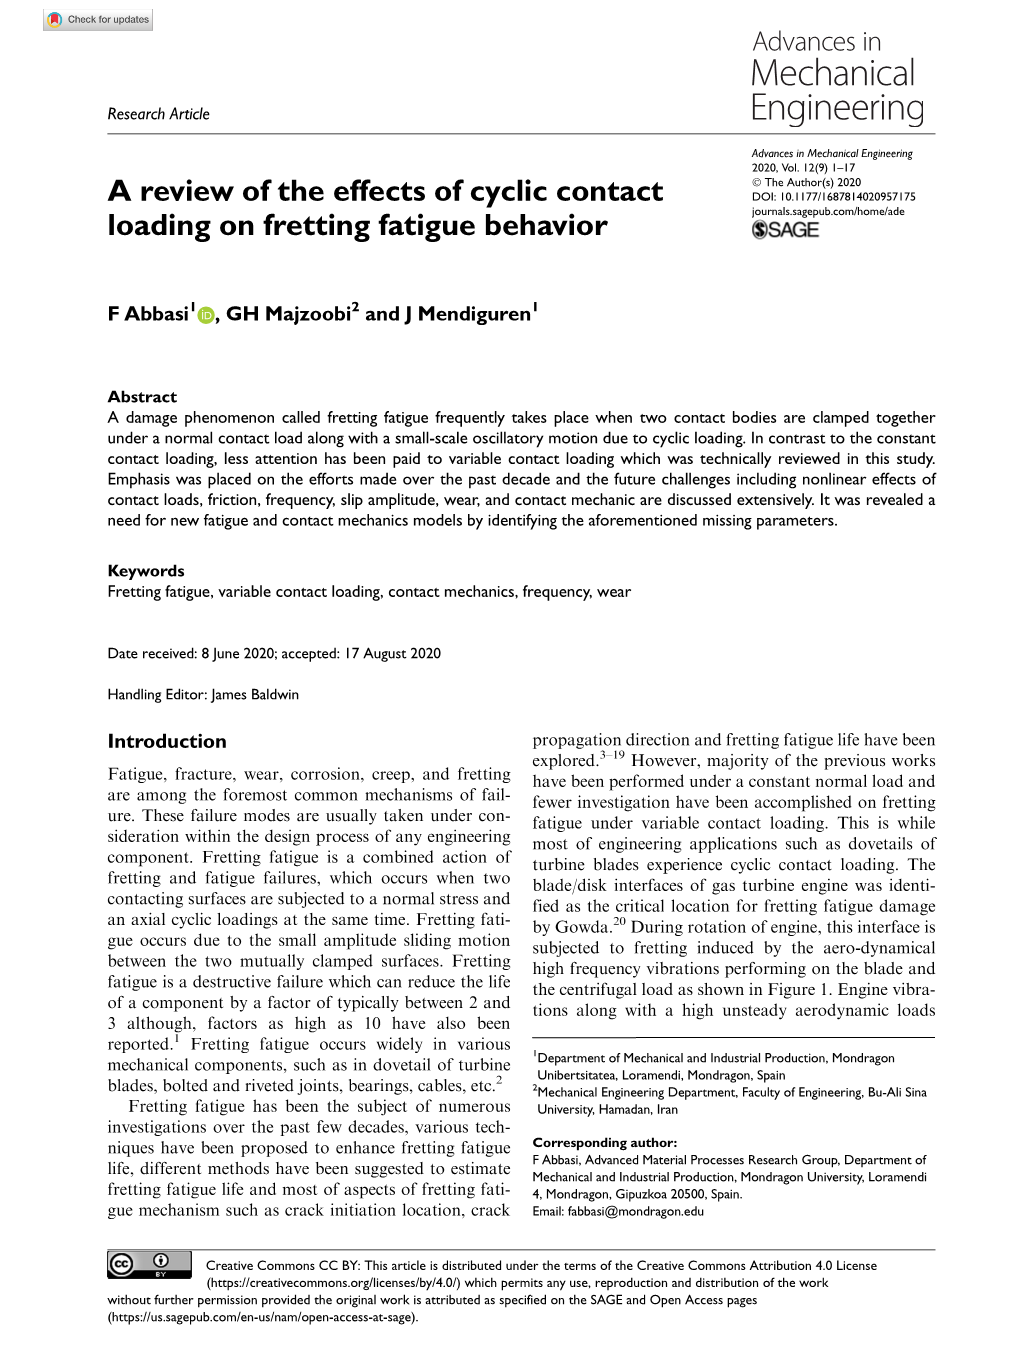 A Review of the Effects of Cyclic Contact Loading on Fretting Fatigue Behavior